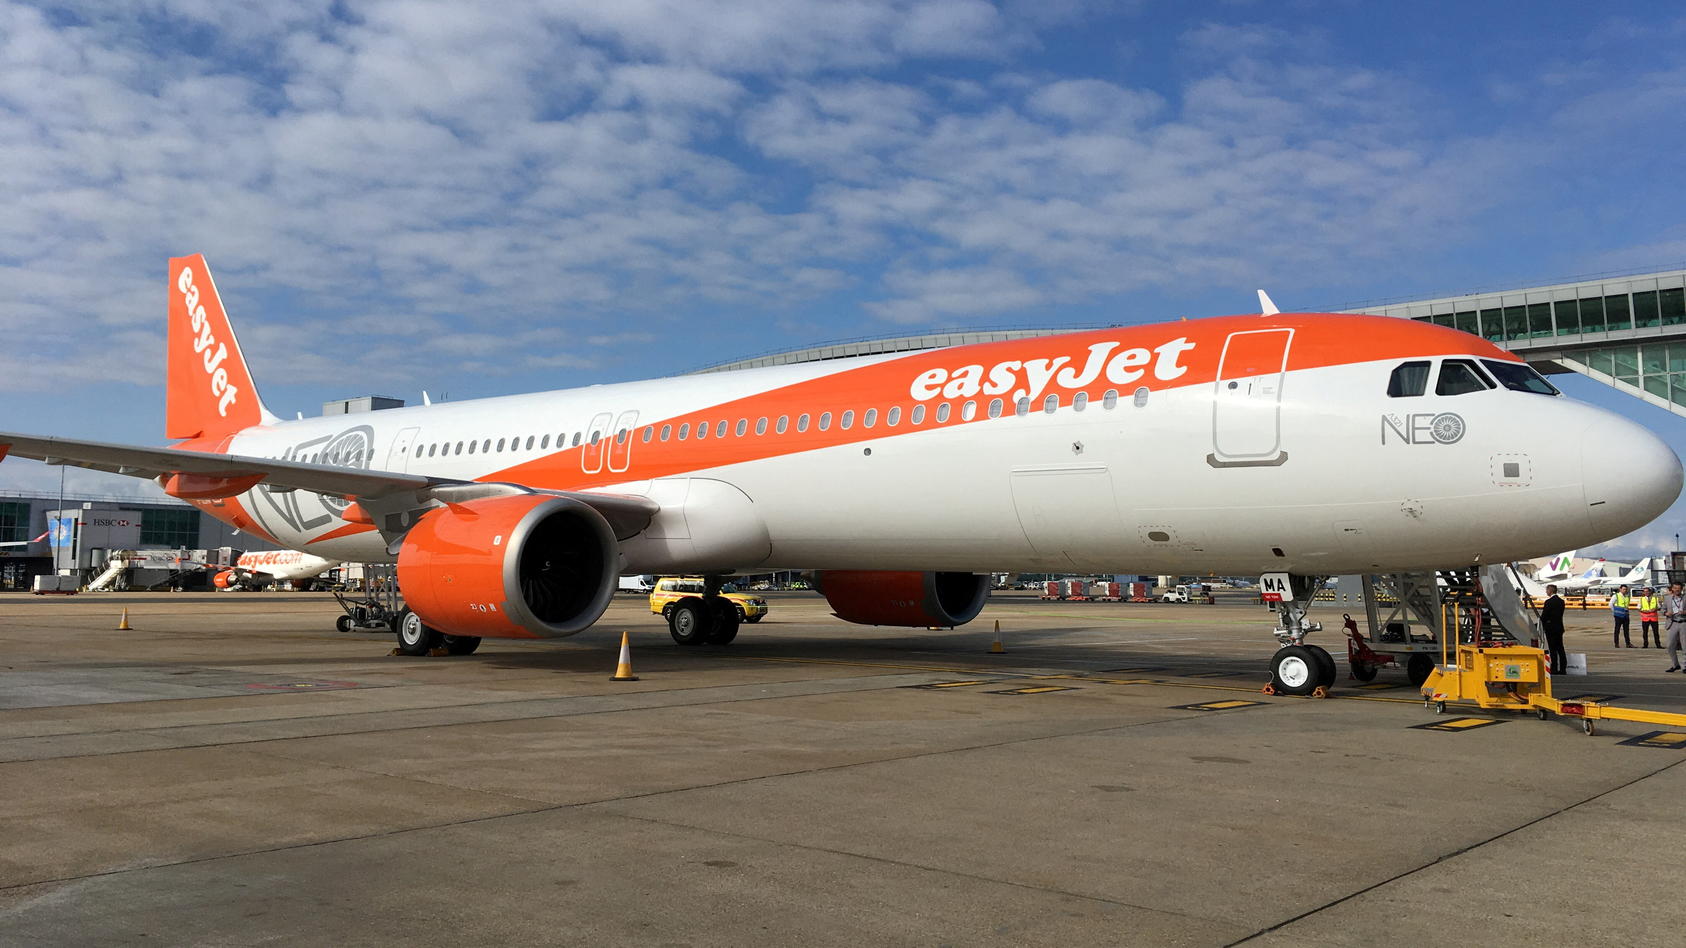 FILE PHOTO: An EasyJet Airbus A321neo aircraft is parked at Gatwick Airport before a special flight to Farnborough International Airshow in Farnborough, Britain, July 18, 2018. REUTERS/Sarah Young/File Photo